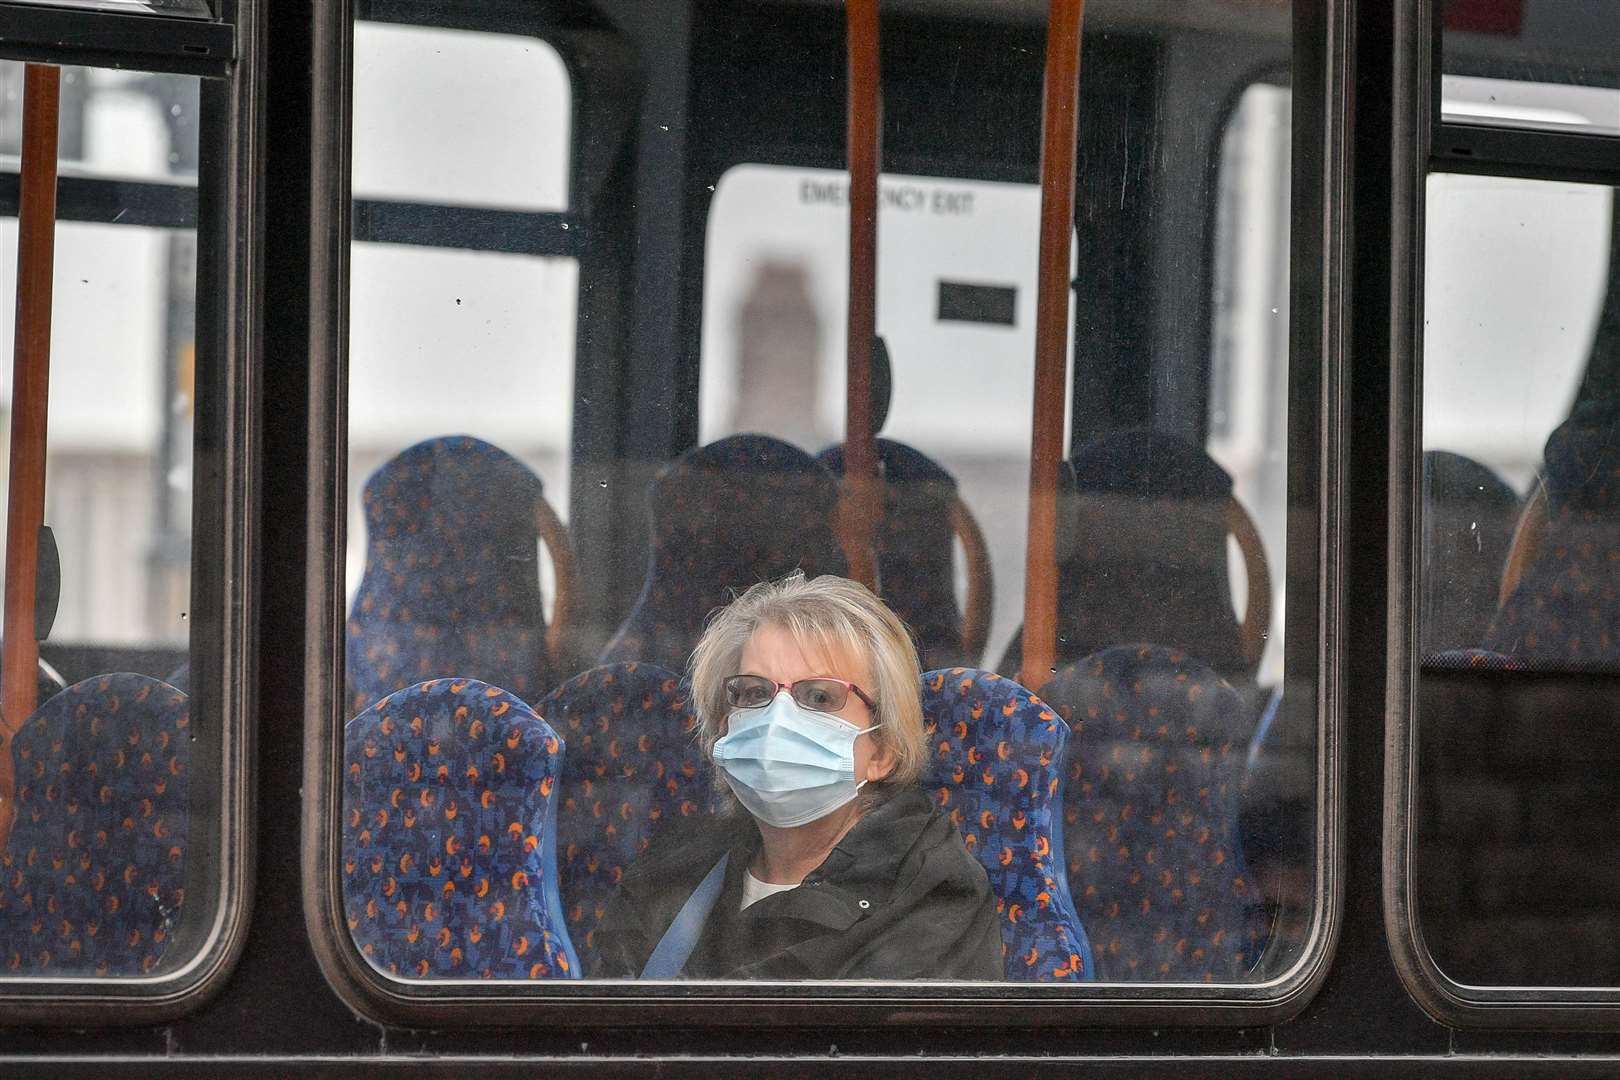 A passenger aboard a bus in Cardiff – not one passenger has been fined in Wales for flouting rules on public transport (Ben Birchall/PA)